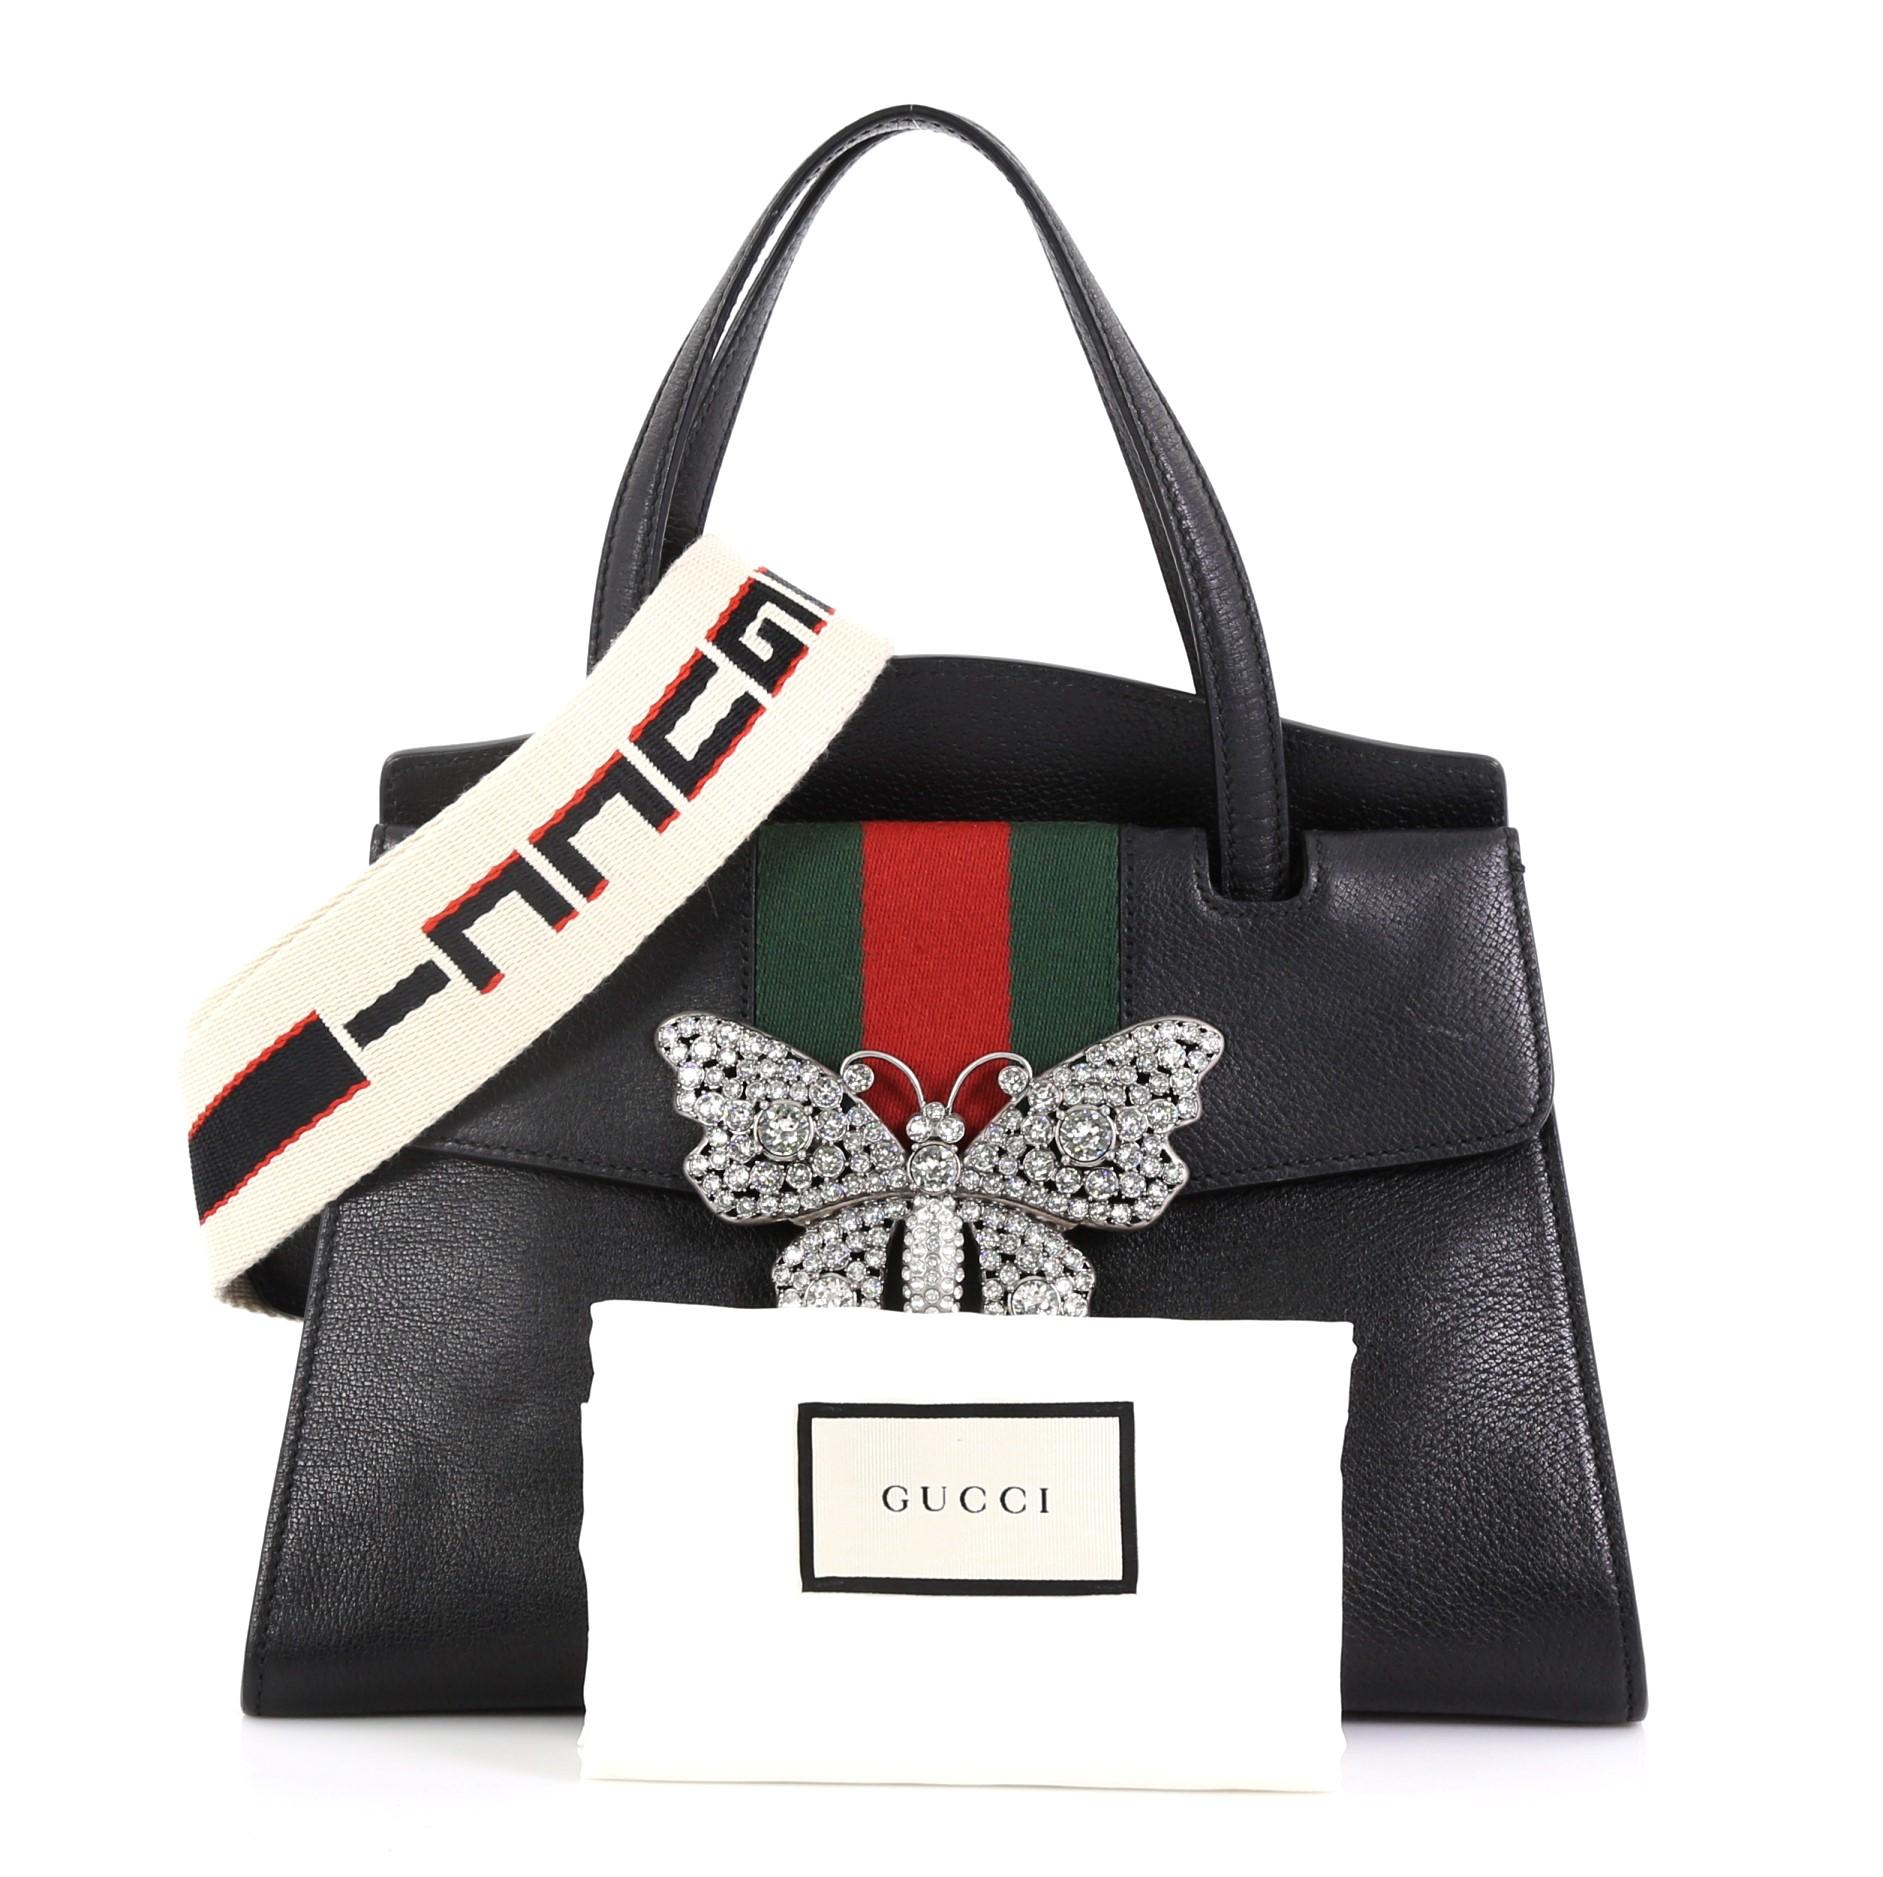 This Gucci Totem Top Handle Bag Leather Medium, crafted from black leather, features dual leather top handles, green and red web with crystal butterfly ornament, and gold-tone hardware. Its press-lock closure opens to a beige microfiber interior